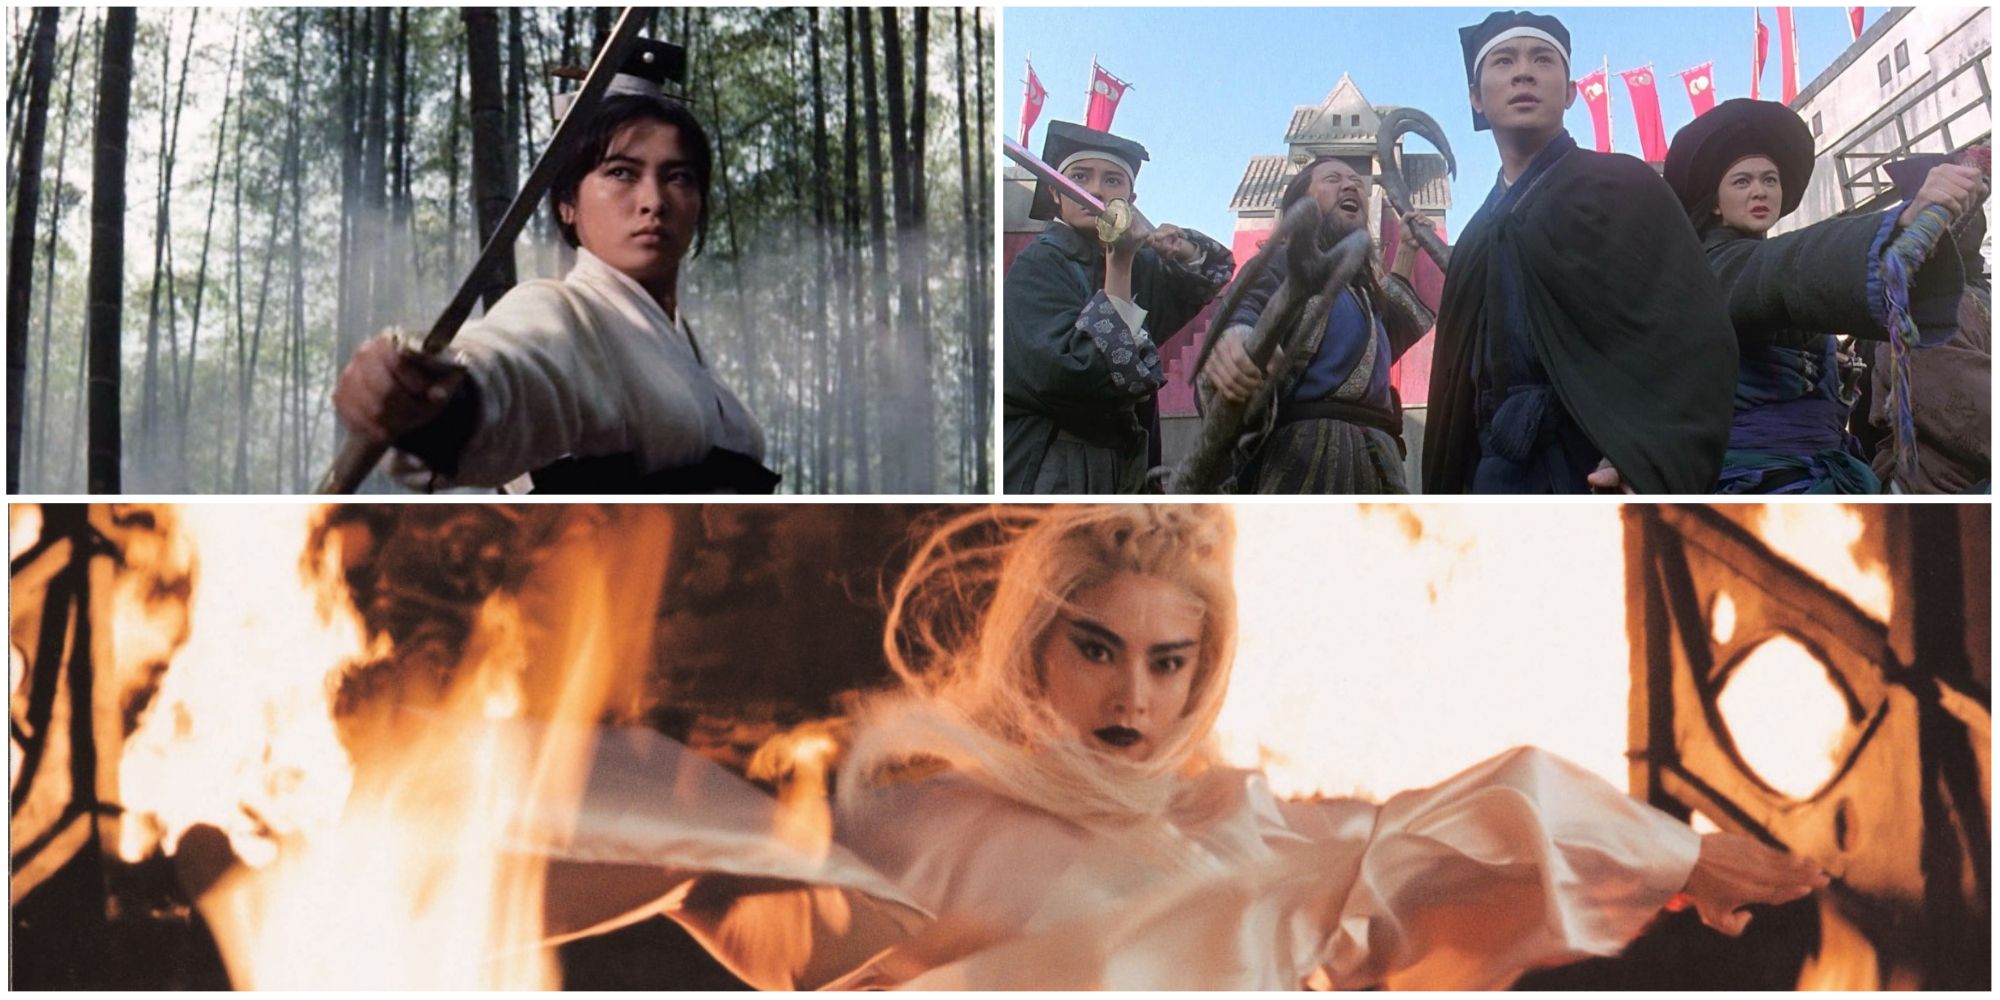 Best Wuxia Films- A Touch of Zen Swordsman 2 The Bride with White Hair